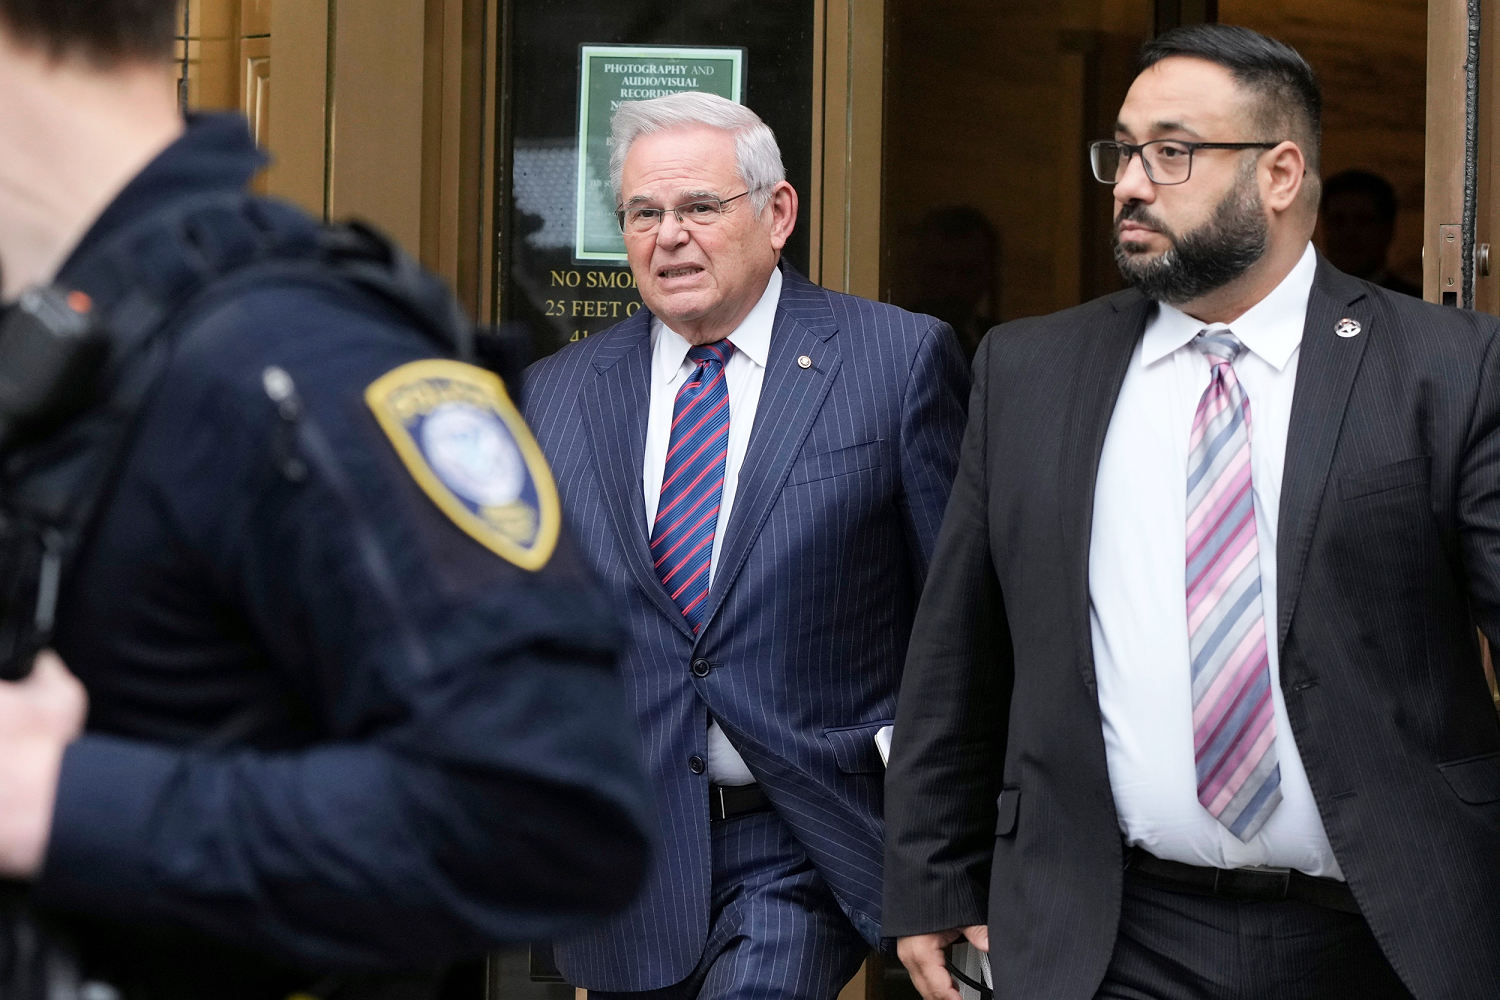 Newly released photos depict cash and gold bars seized from Sen. Bob Menendez’s home